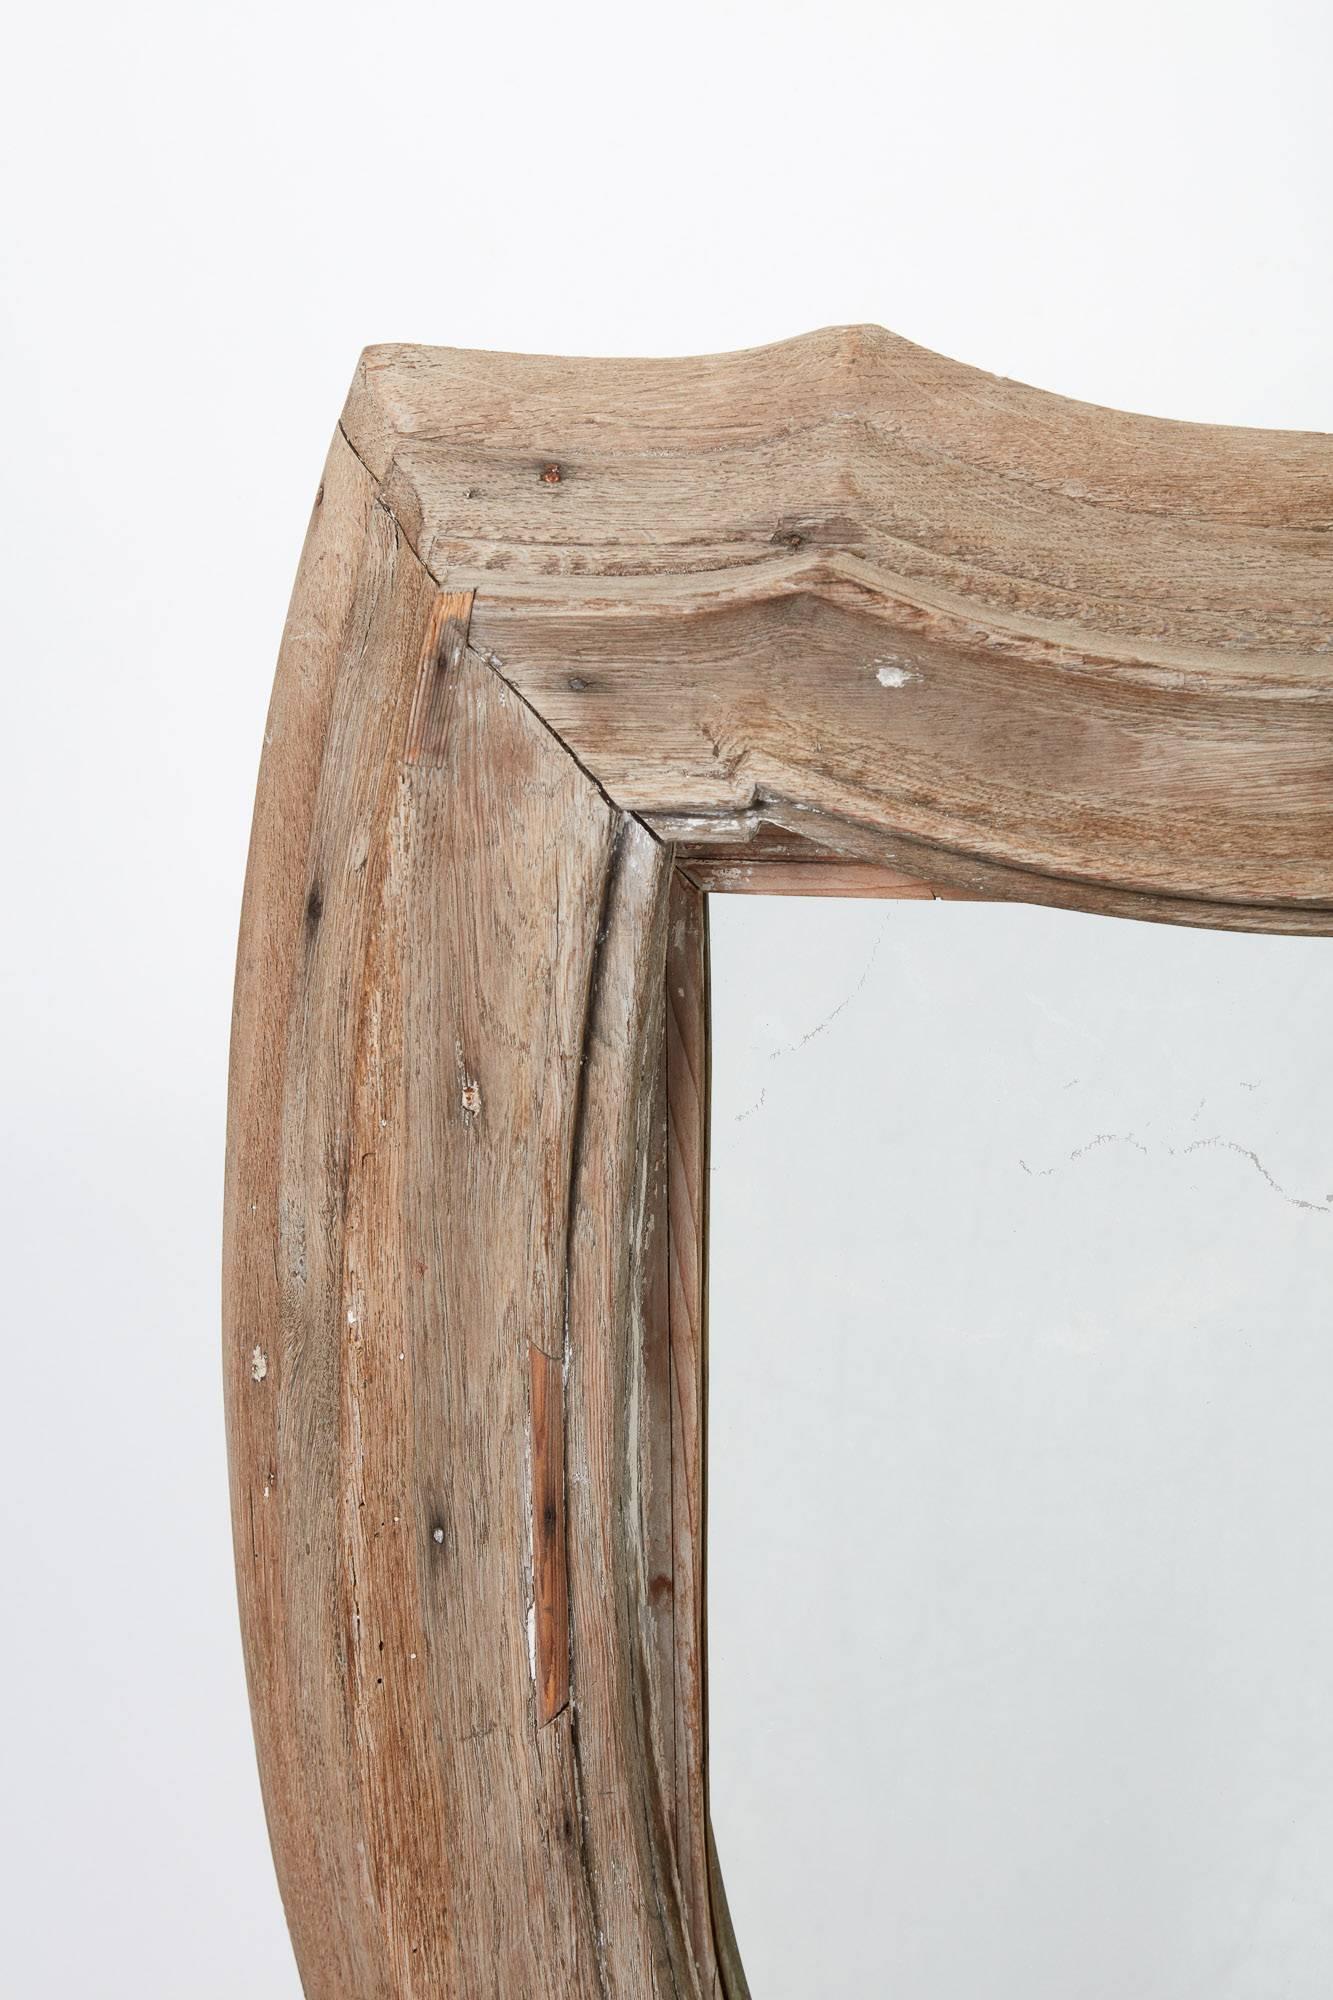 19th Century French Bleached Wood Mirror. Antiqued shield mirror. Weathered natural wood finish on the shield shaped frame. Mirror is in excellent condition.